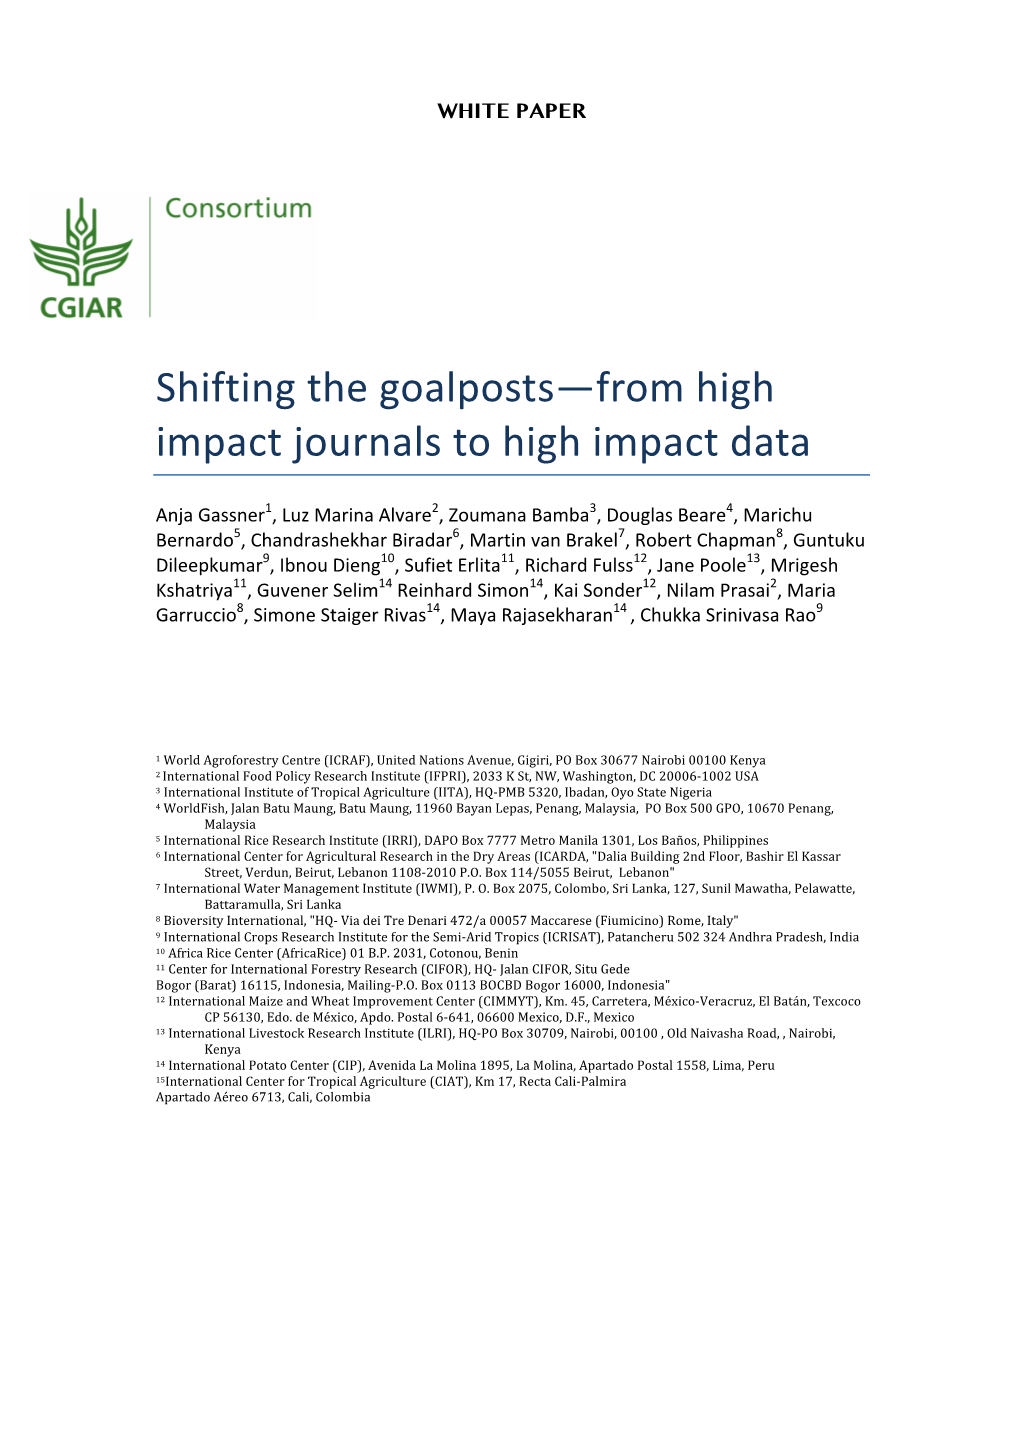 Shifting the Goalposts—From High Impact Journals to High Impact Data